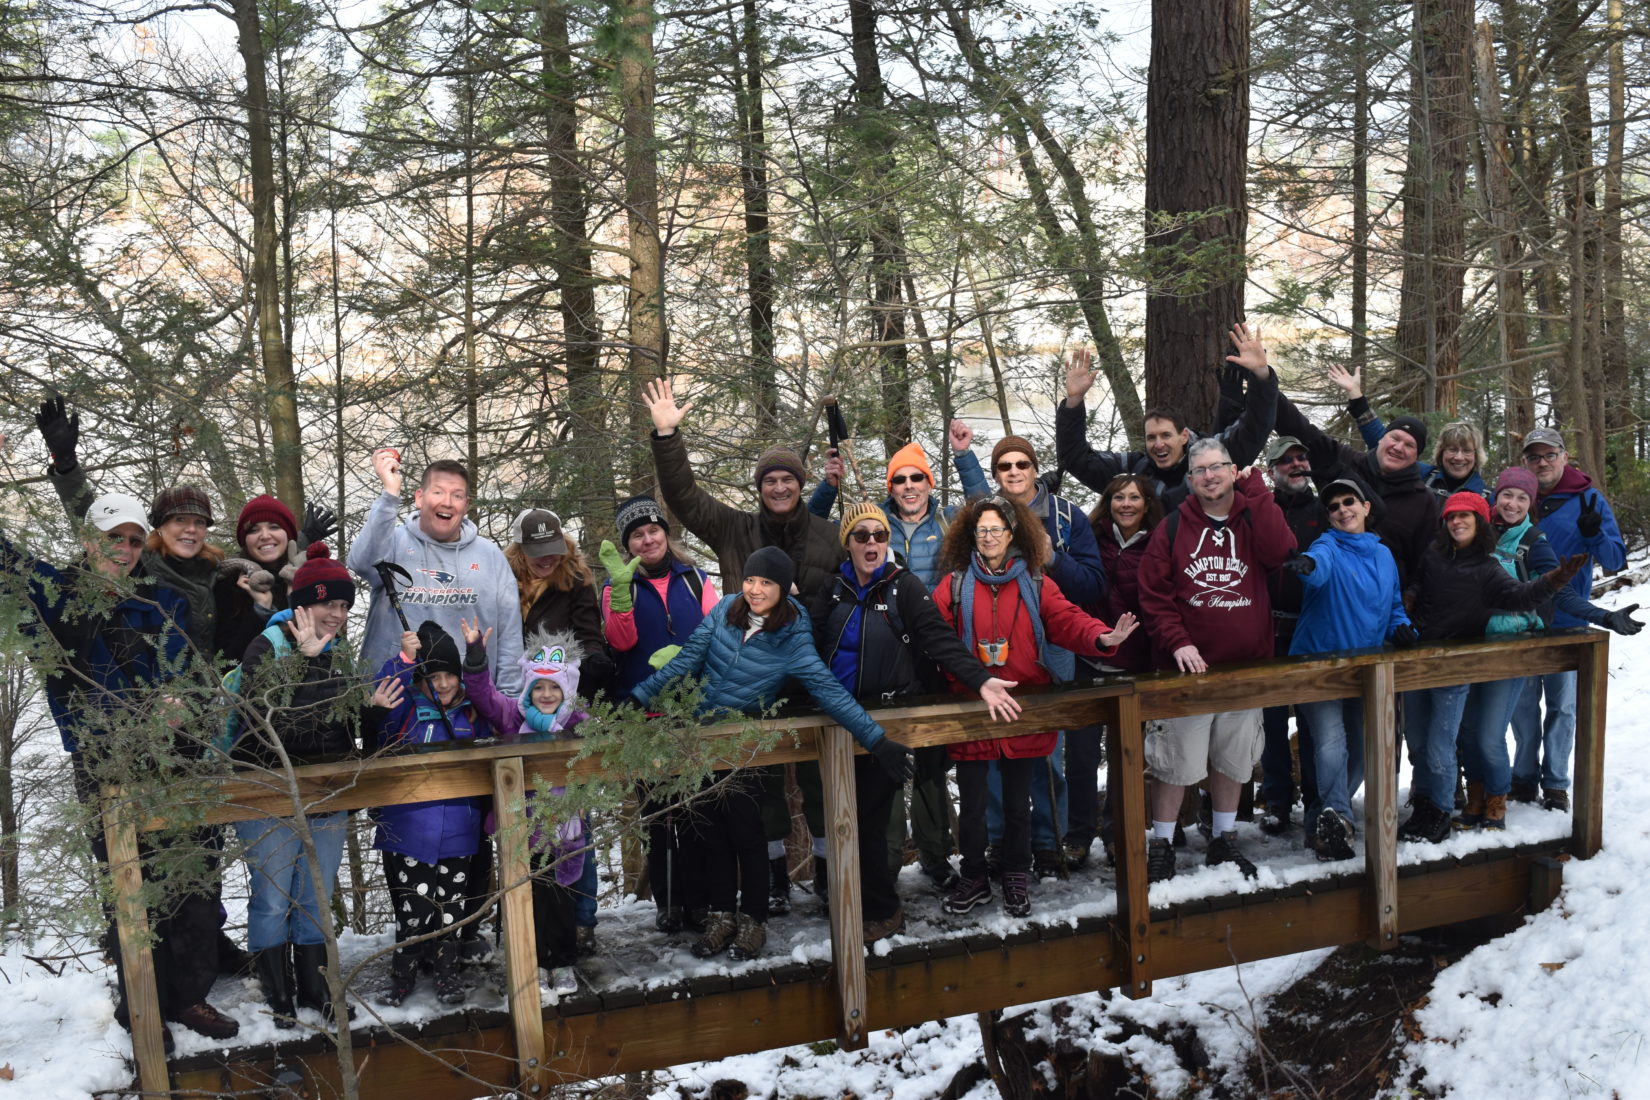 Group of people of all ages posing on a bridge in winter, smiling arms in the air